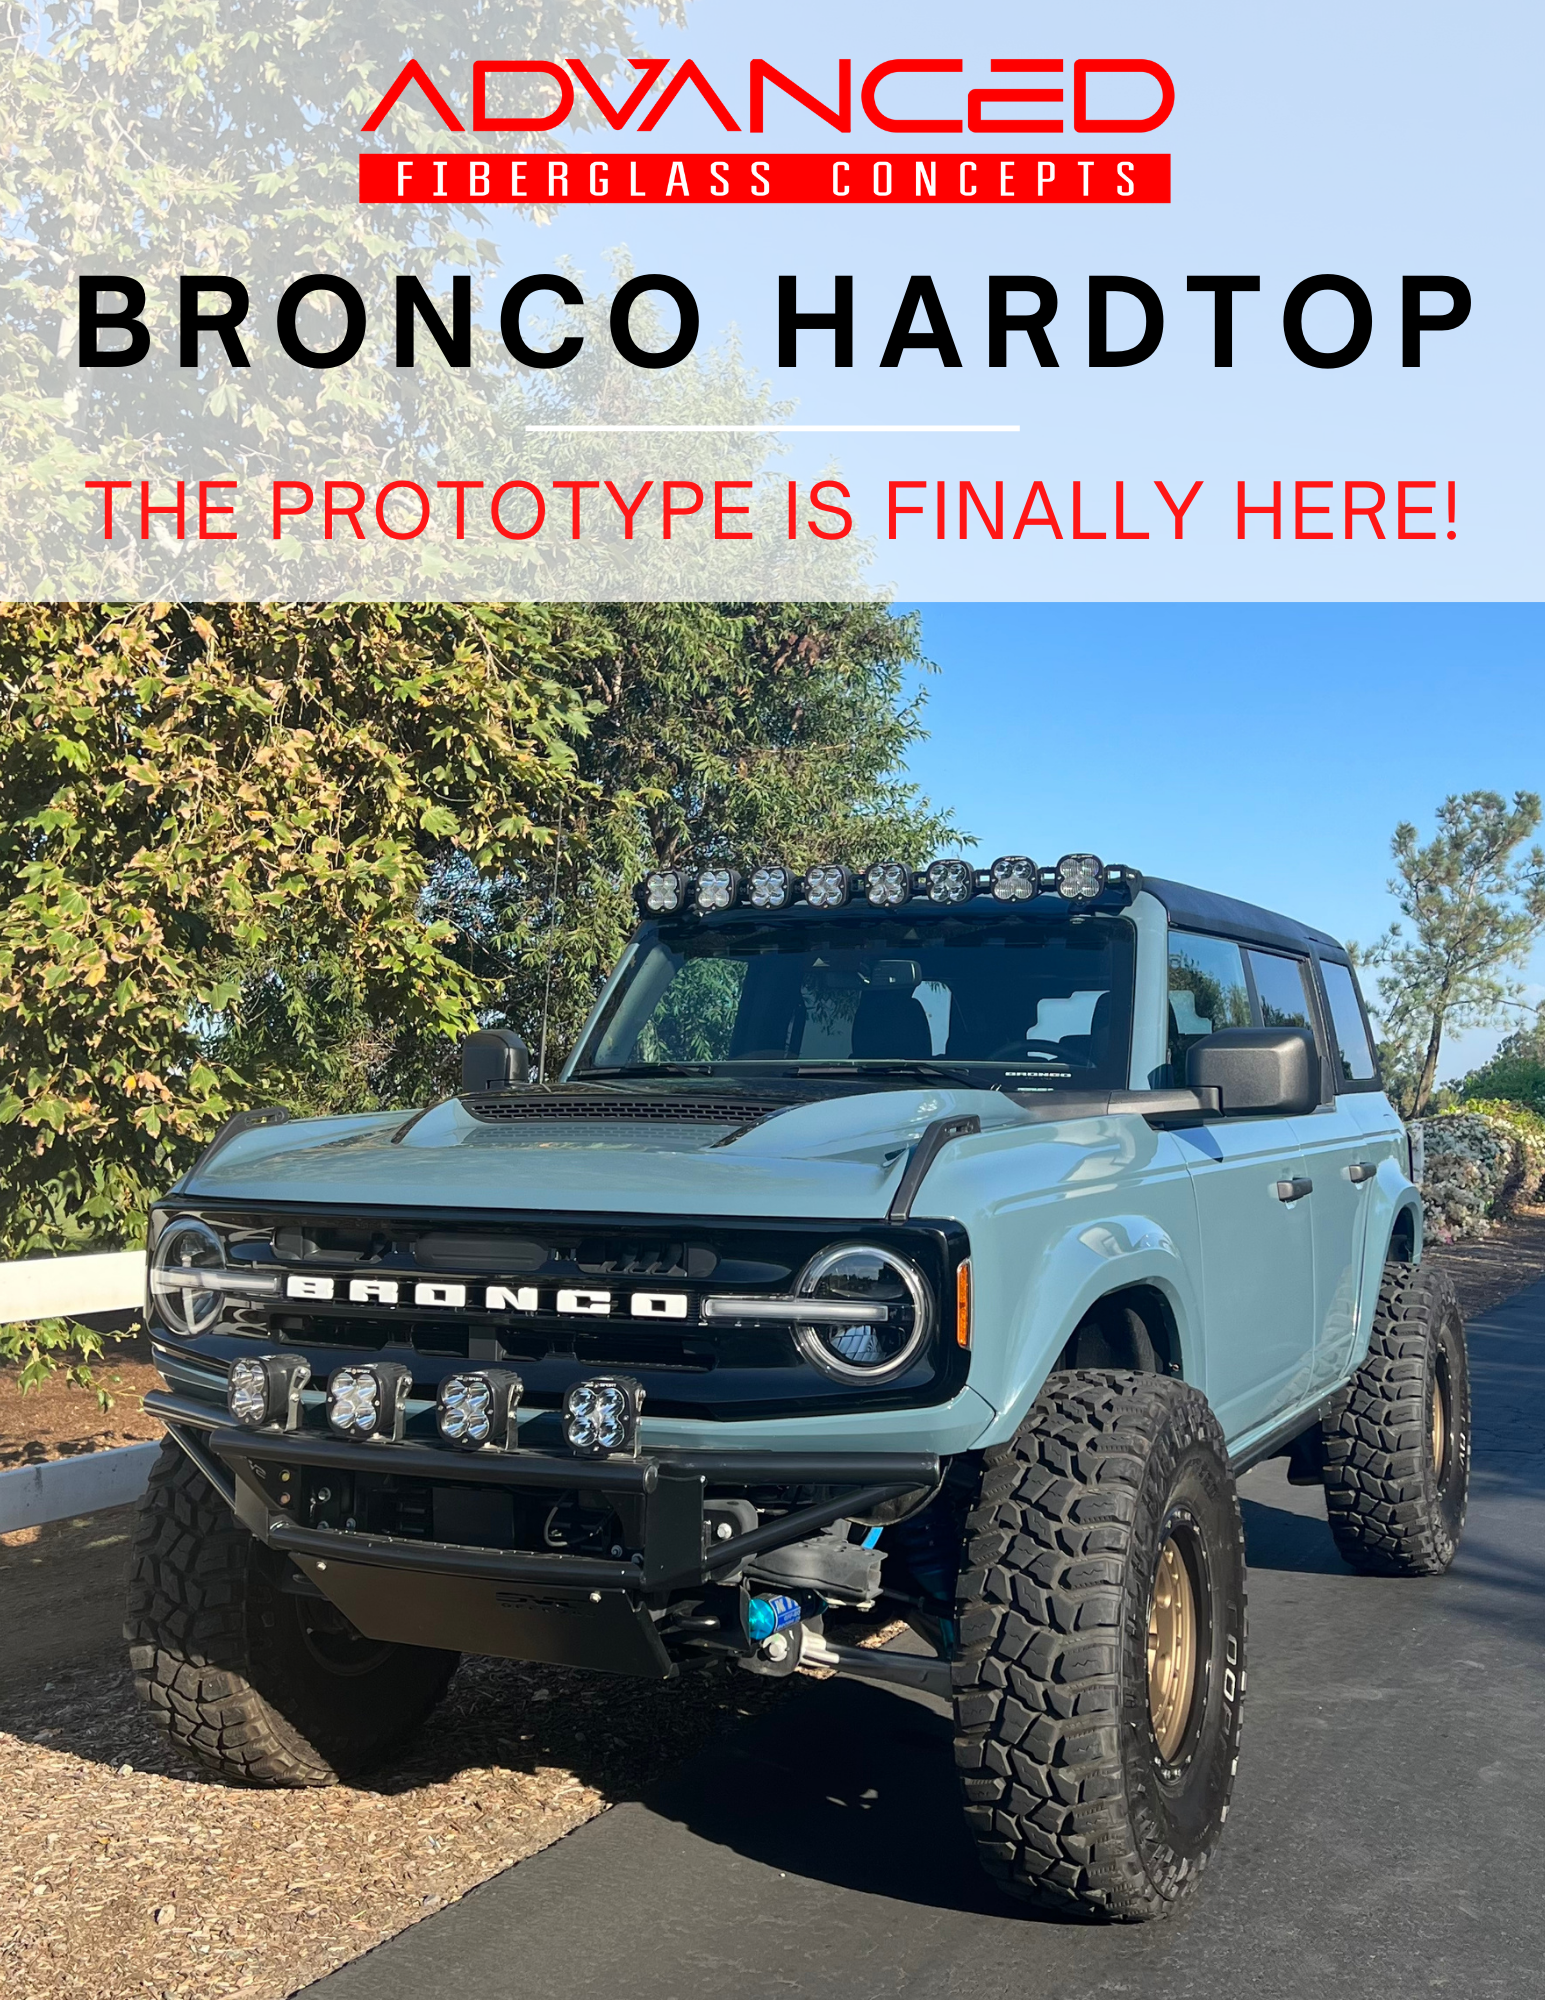 Ford Bronco The Moment You've All Been Waiting For🙏  FORD BRONCO HARDTOP PROTOTYPE by ADV Fiberglass (Q&A Added) E877E2E7-AF53-41D0-9E4B-D9A587EFDDD2